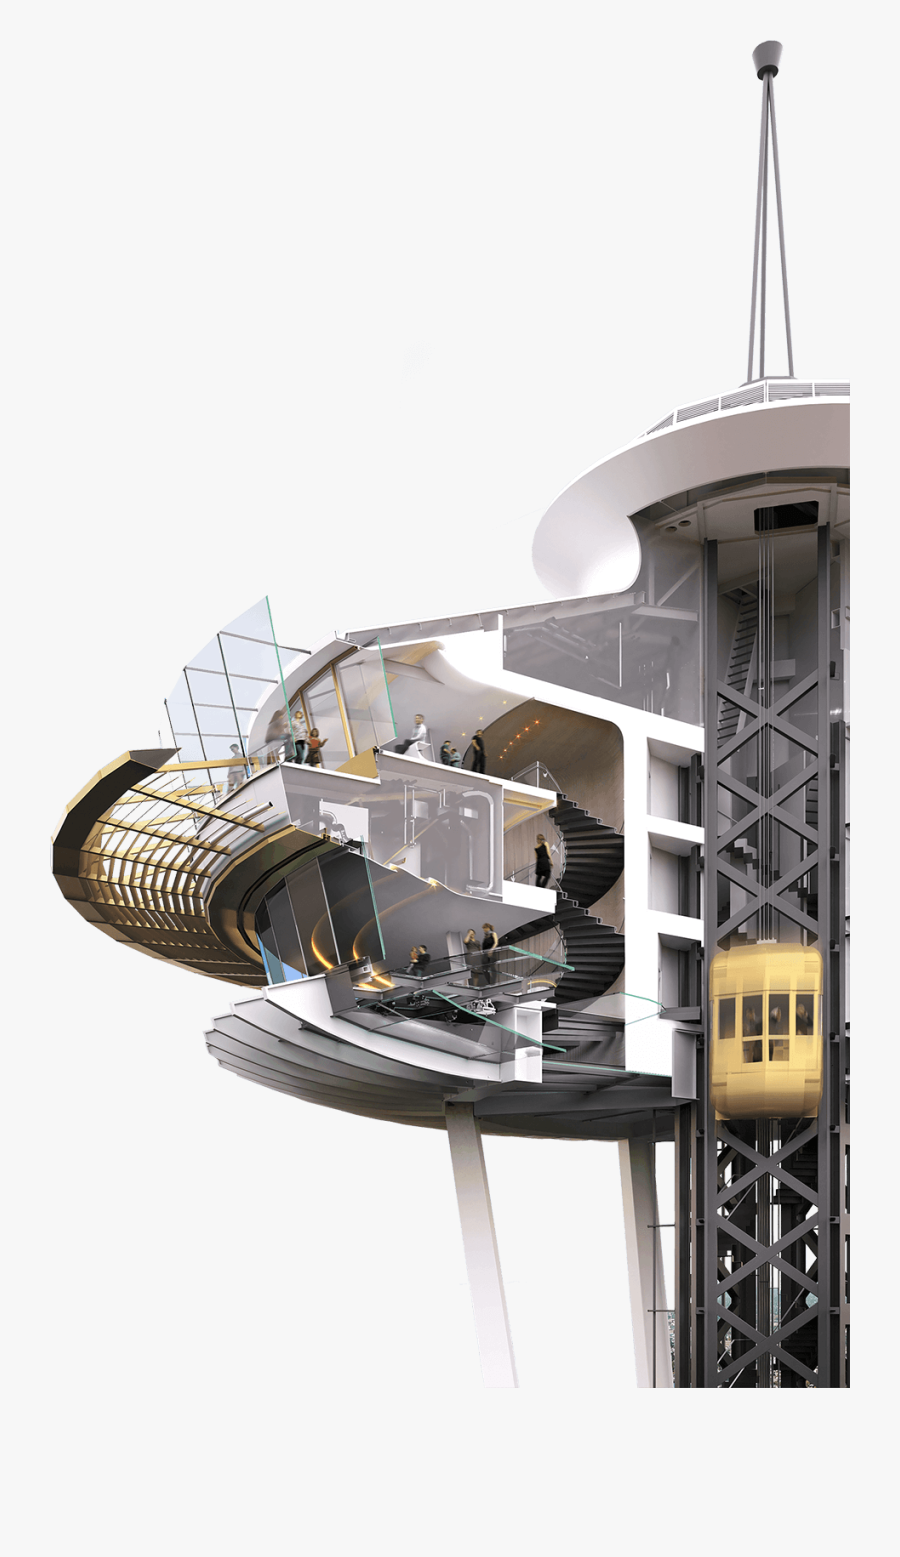 Space Needle Cutaway Image - Space Needle Cross Section, Transparent Clipart